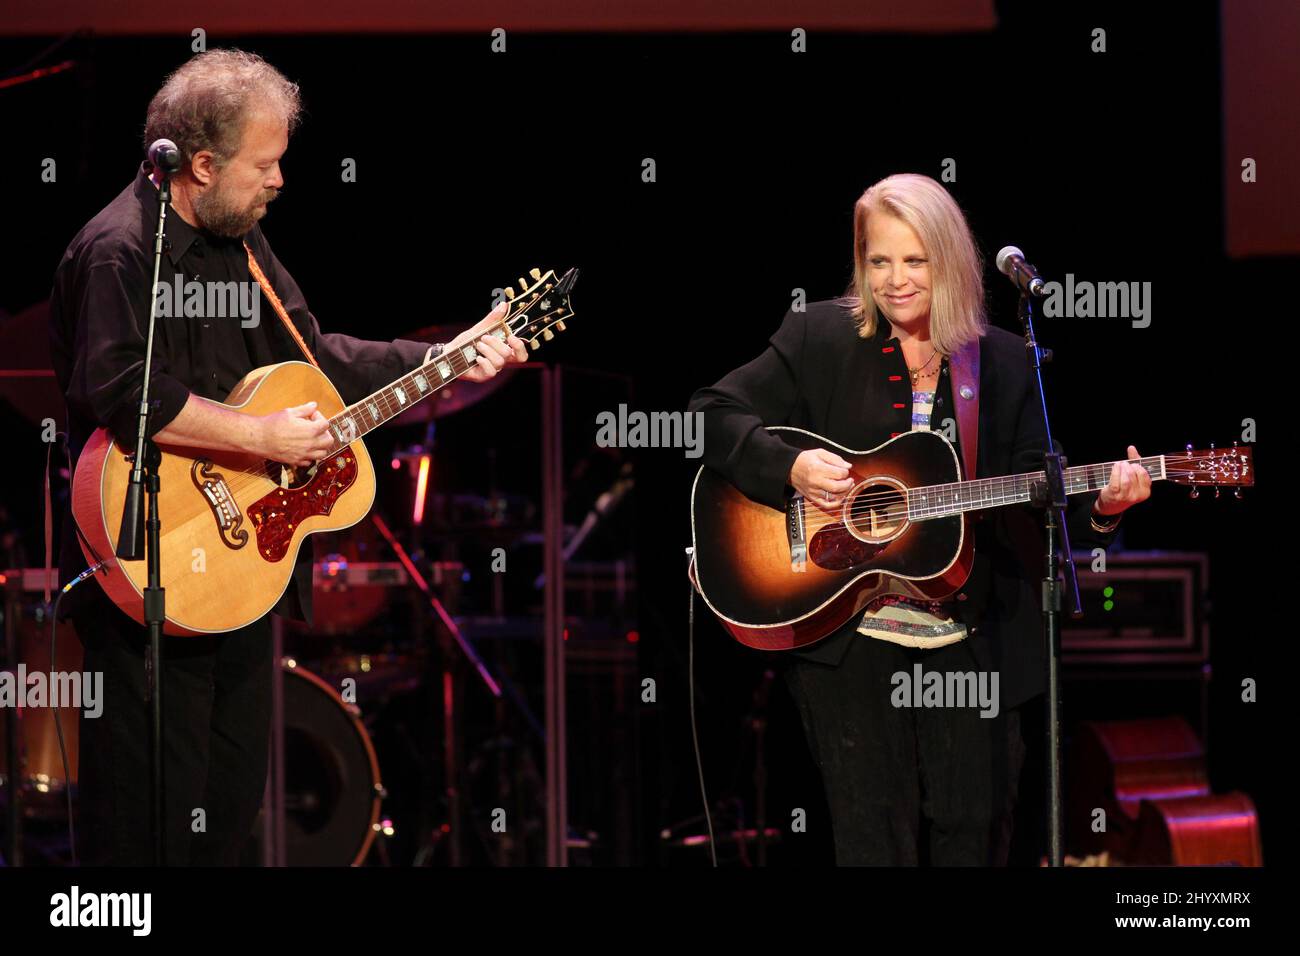 Don Schlitz,Mary Chapin Carpenter during the Academy of Country Music Awards Honors at the Ryman Auditorium, Nashville. Stock Photo